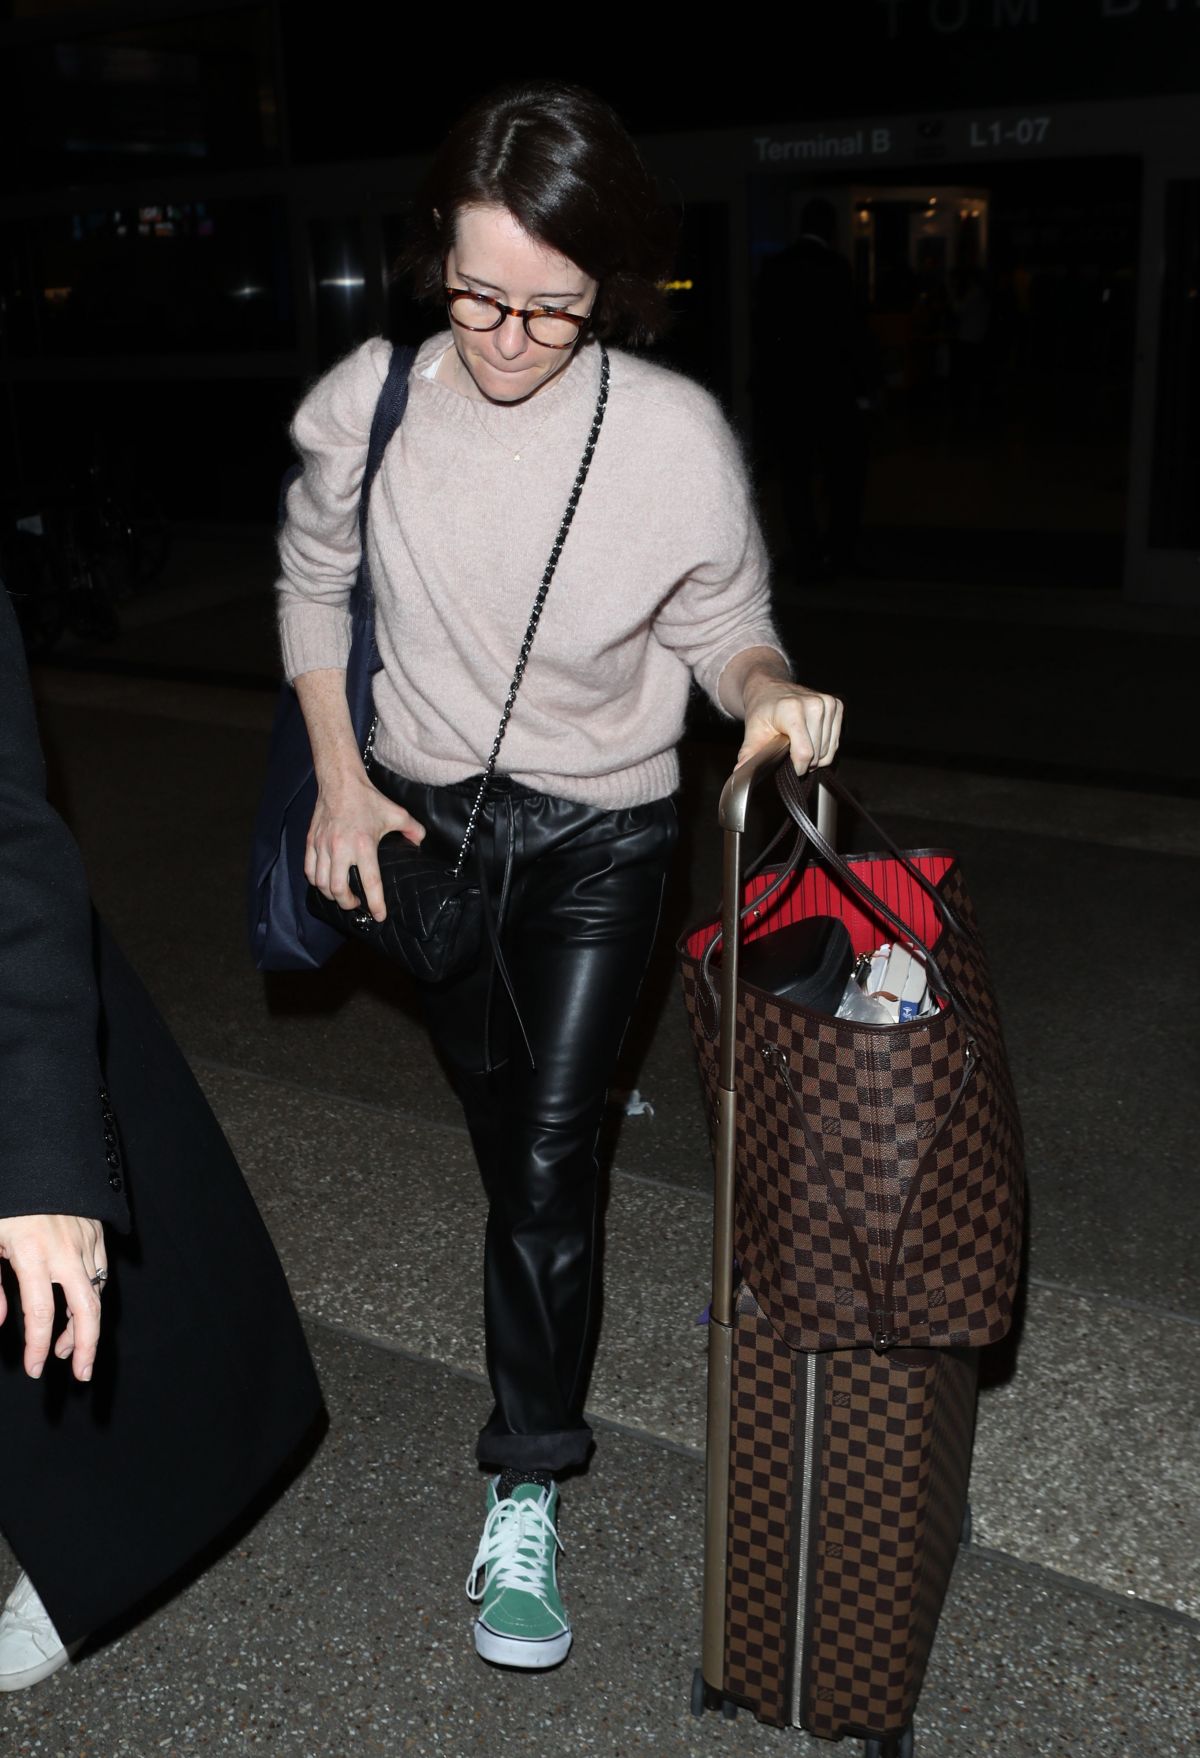 CLAIRE FOY at LAX Airport in Los Angeles 02/04/2019 – HawtCelebs